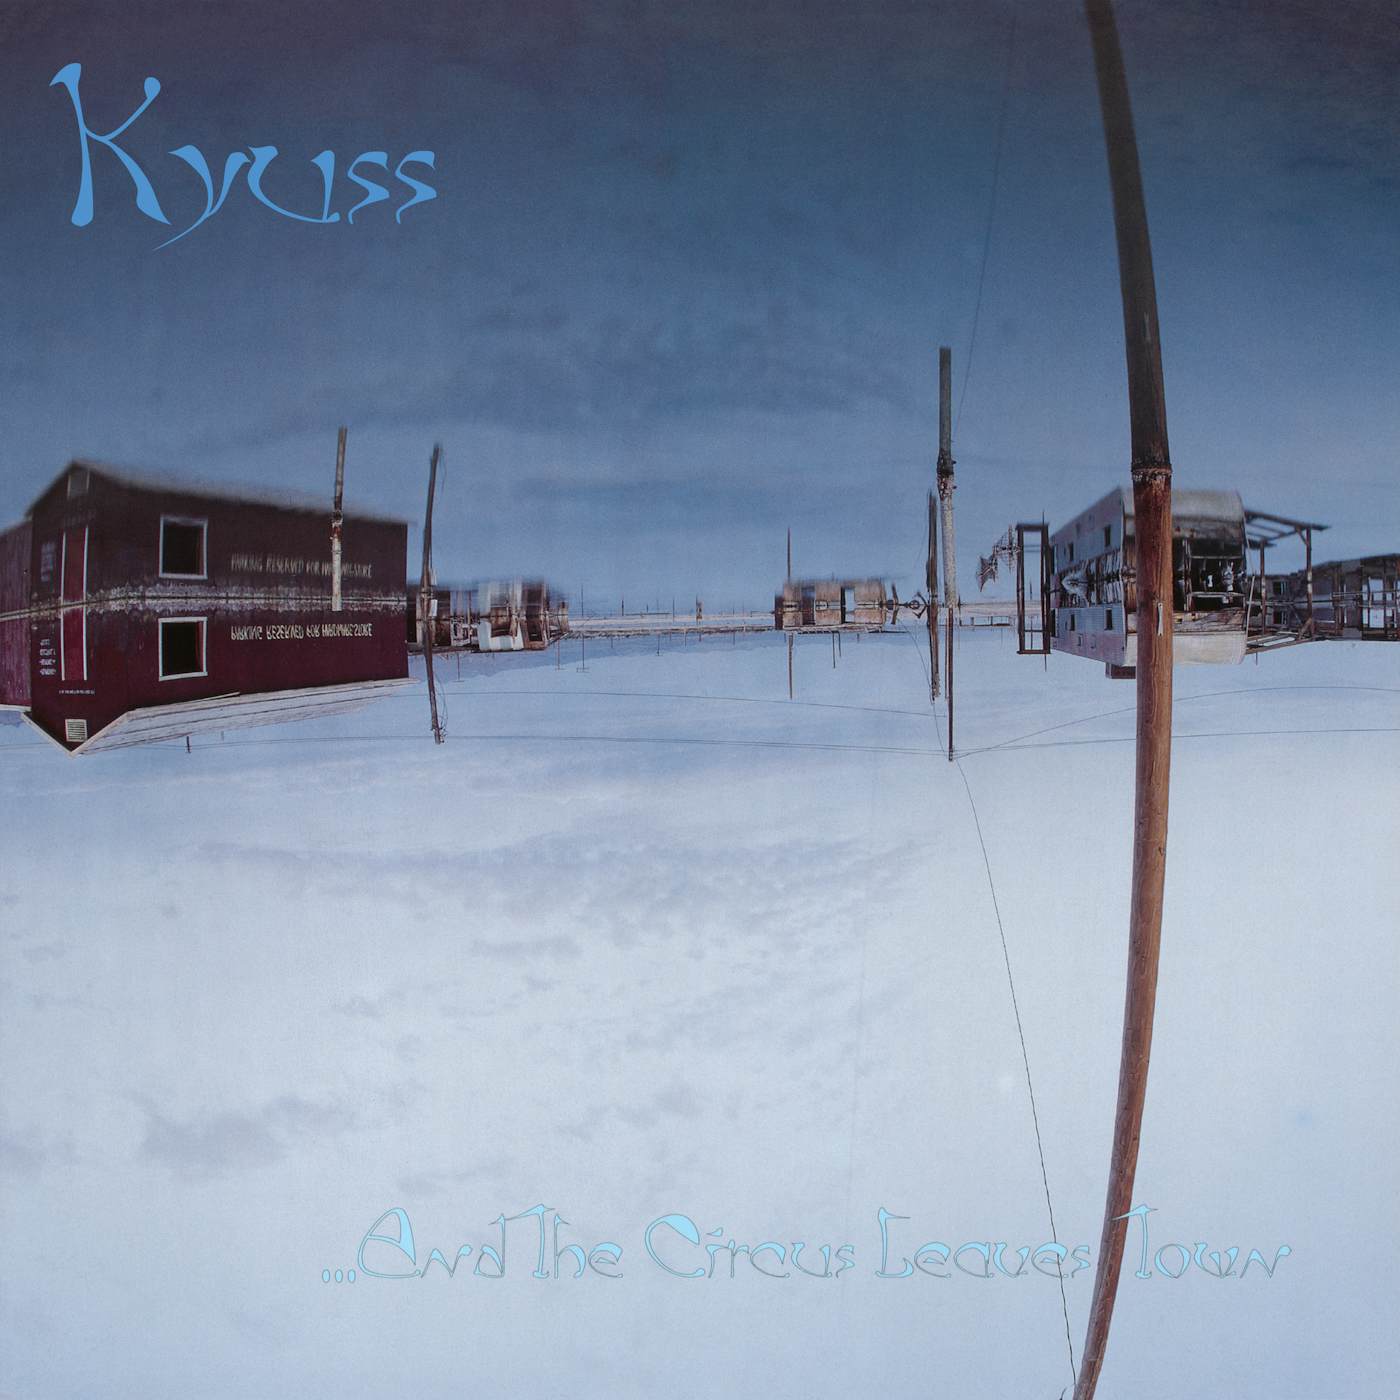 Kyuss & THE CIRCUS LEAVES TOWN Vinyl Record